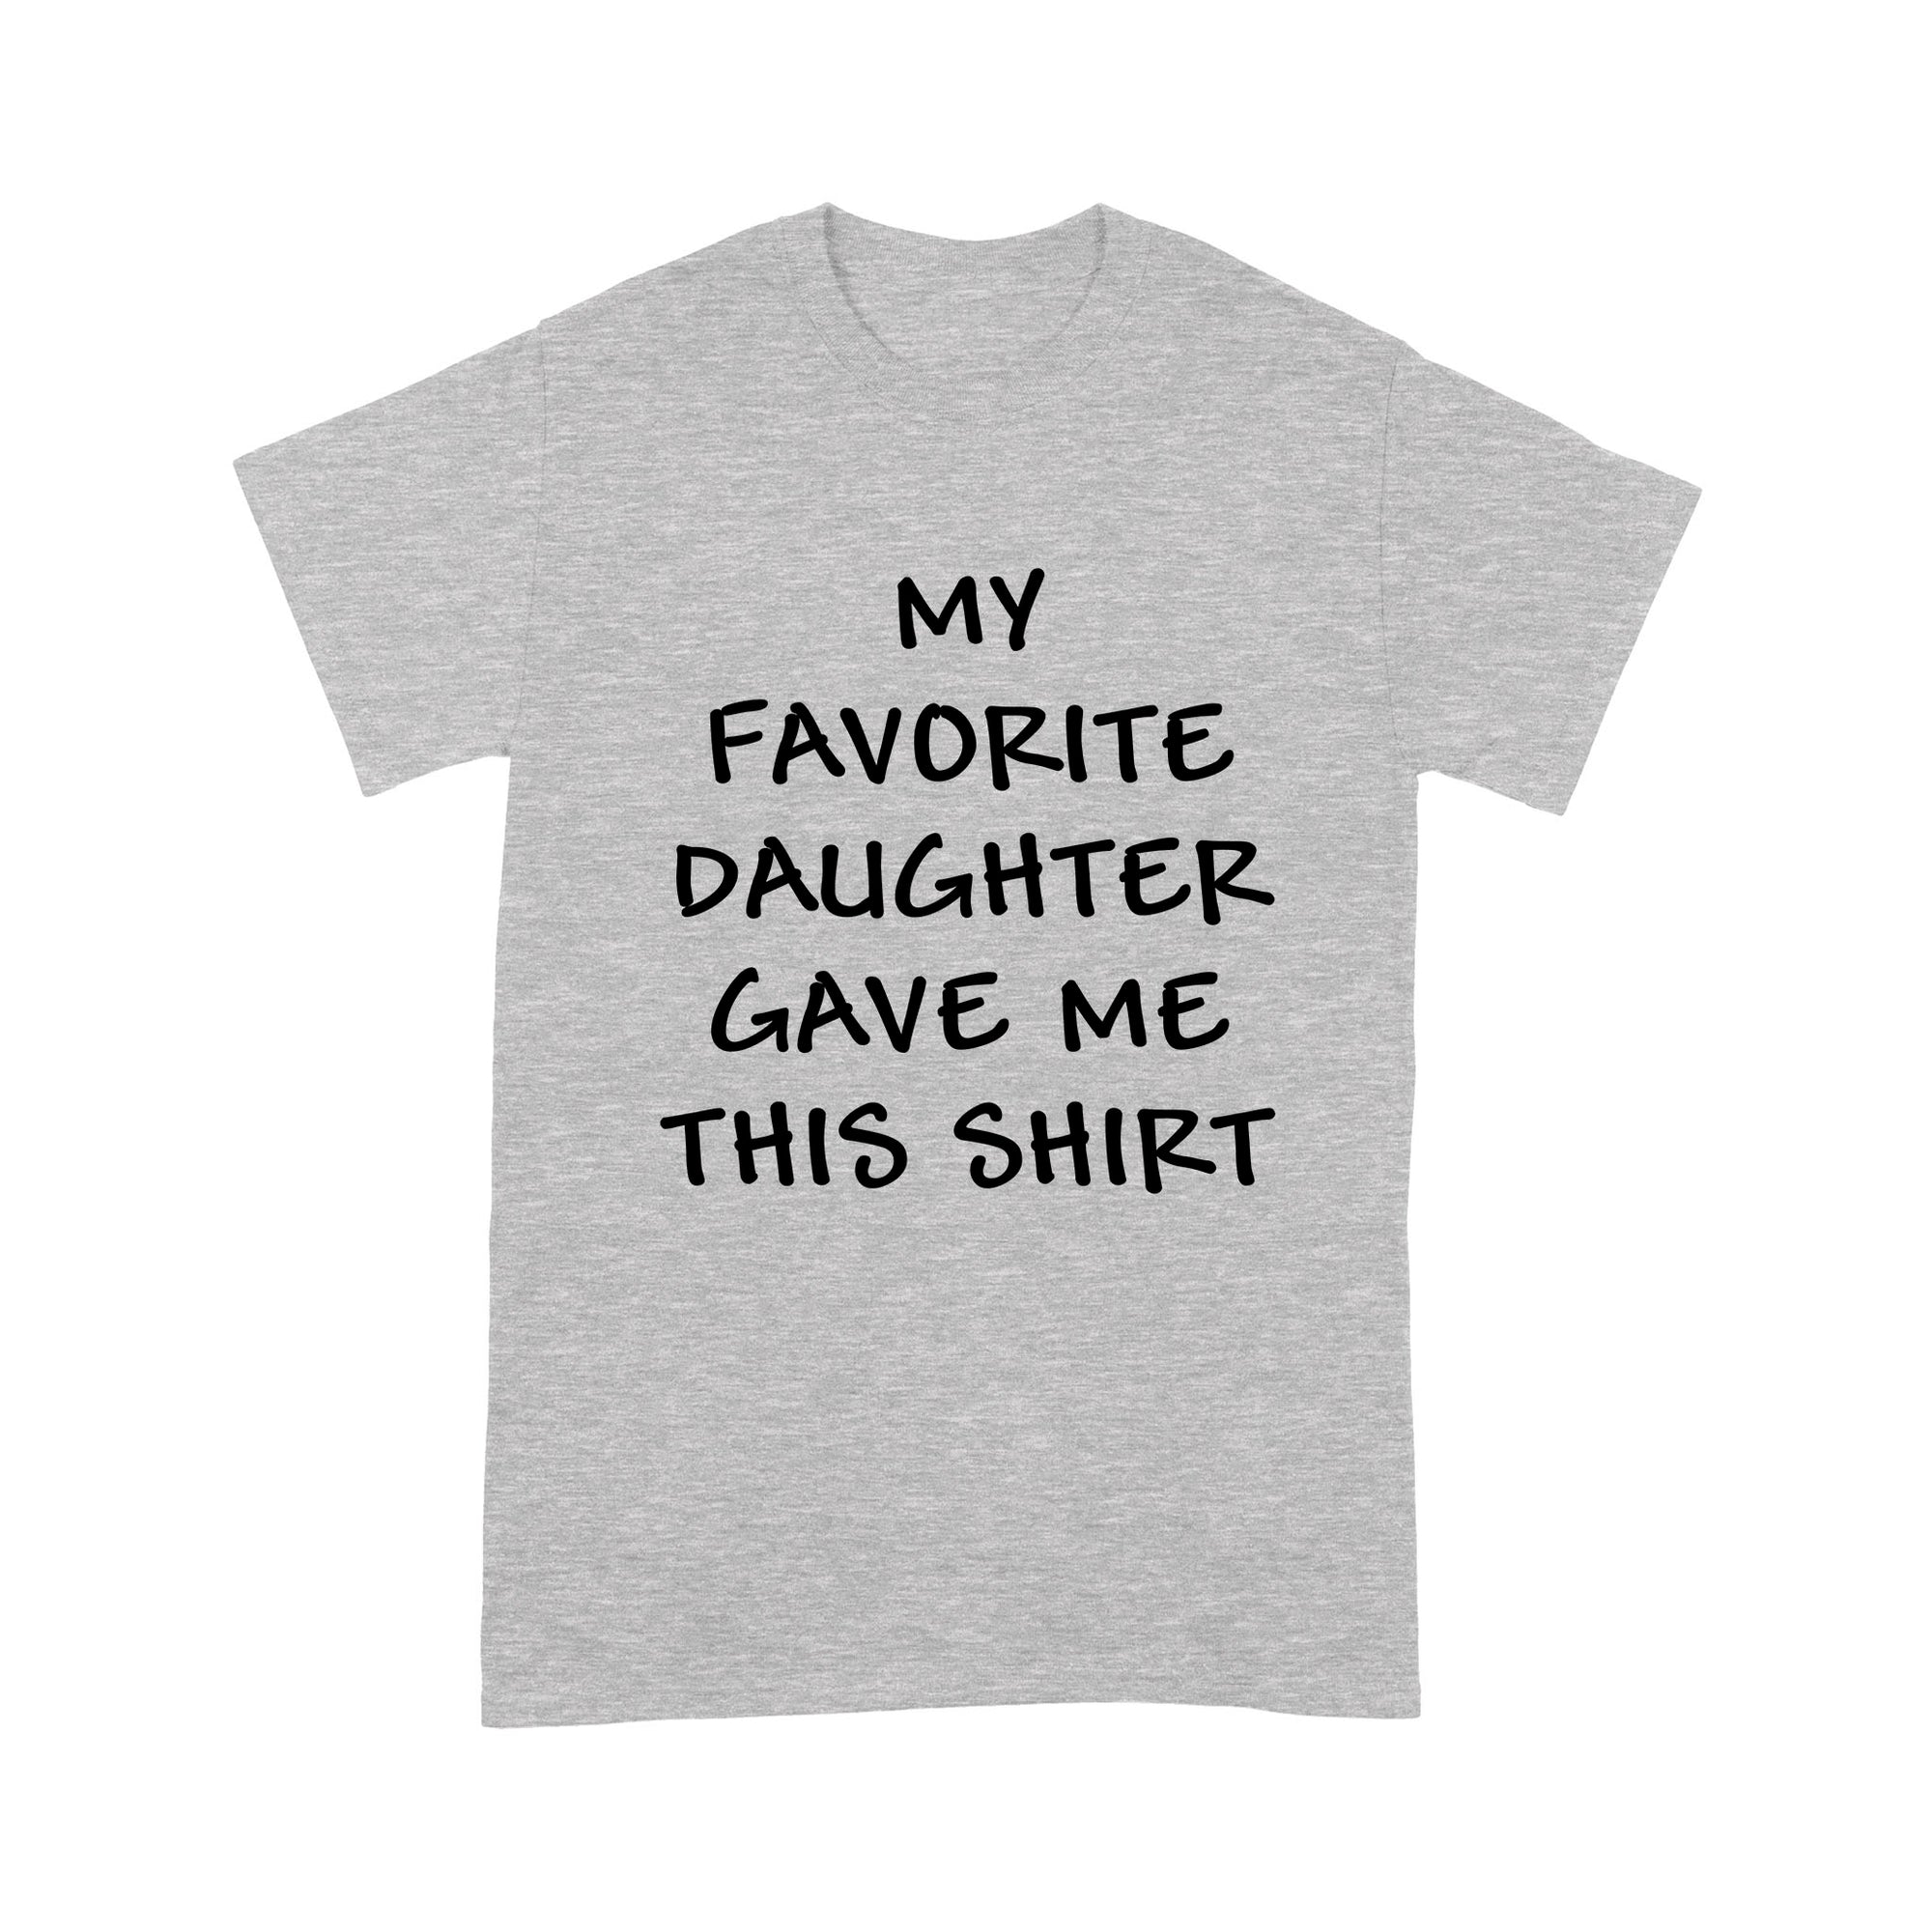 Gift Ideas for Dad My Favorite Daughter Gave Me This Shirt - Standard T-shirt